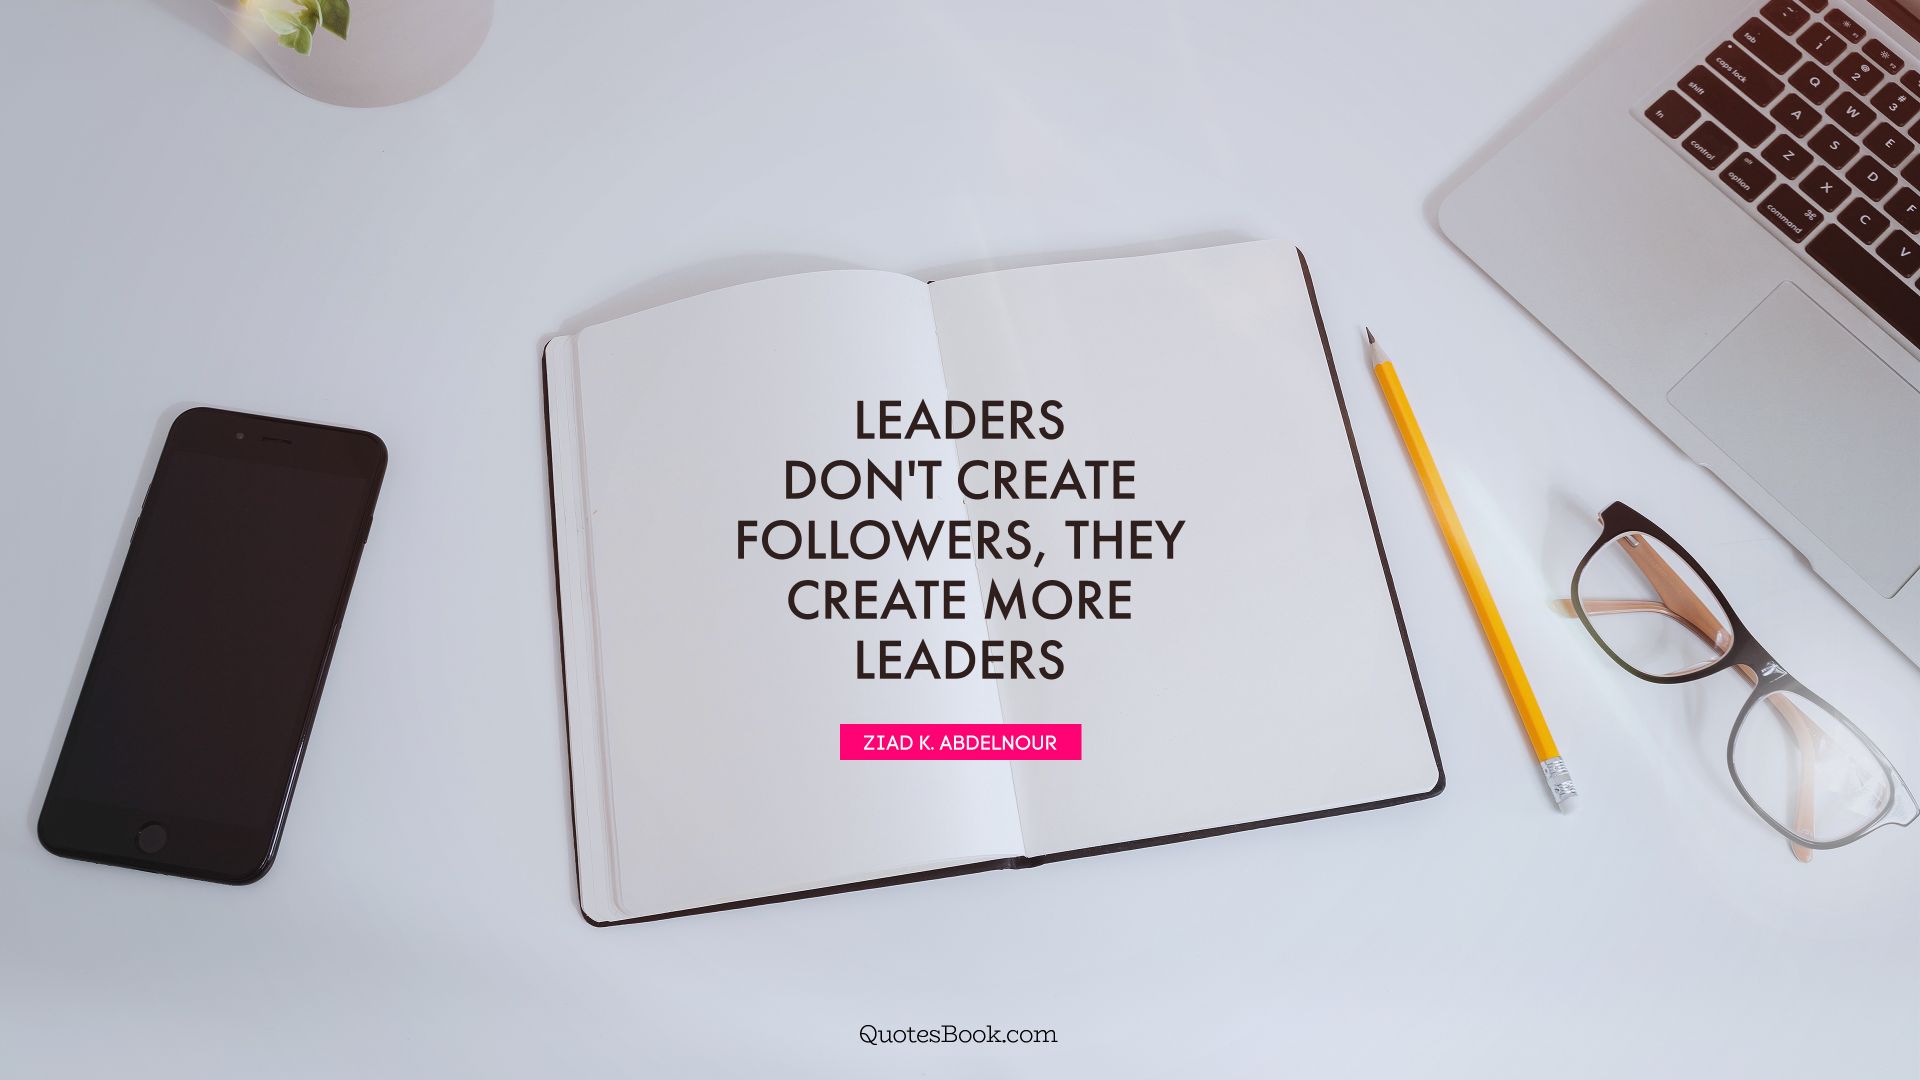 Leaders don't create followers, they create more leaders. - Quote by Ziad K. Abdelnour